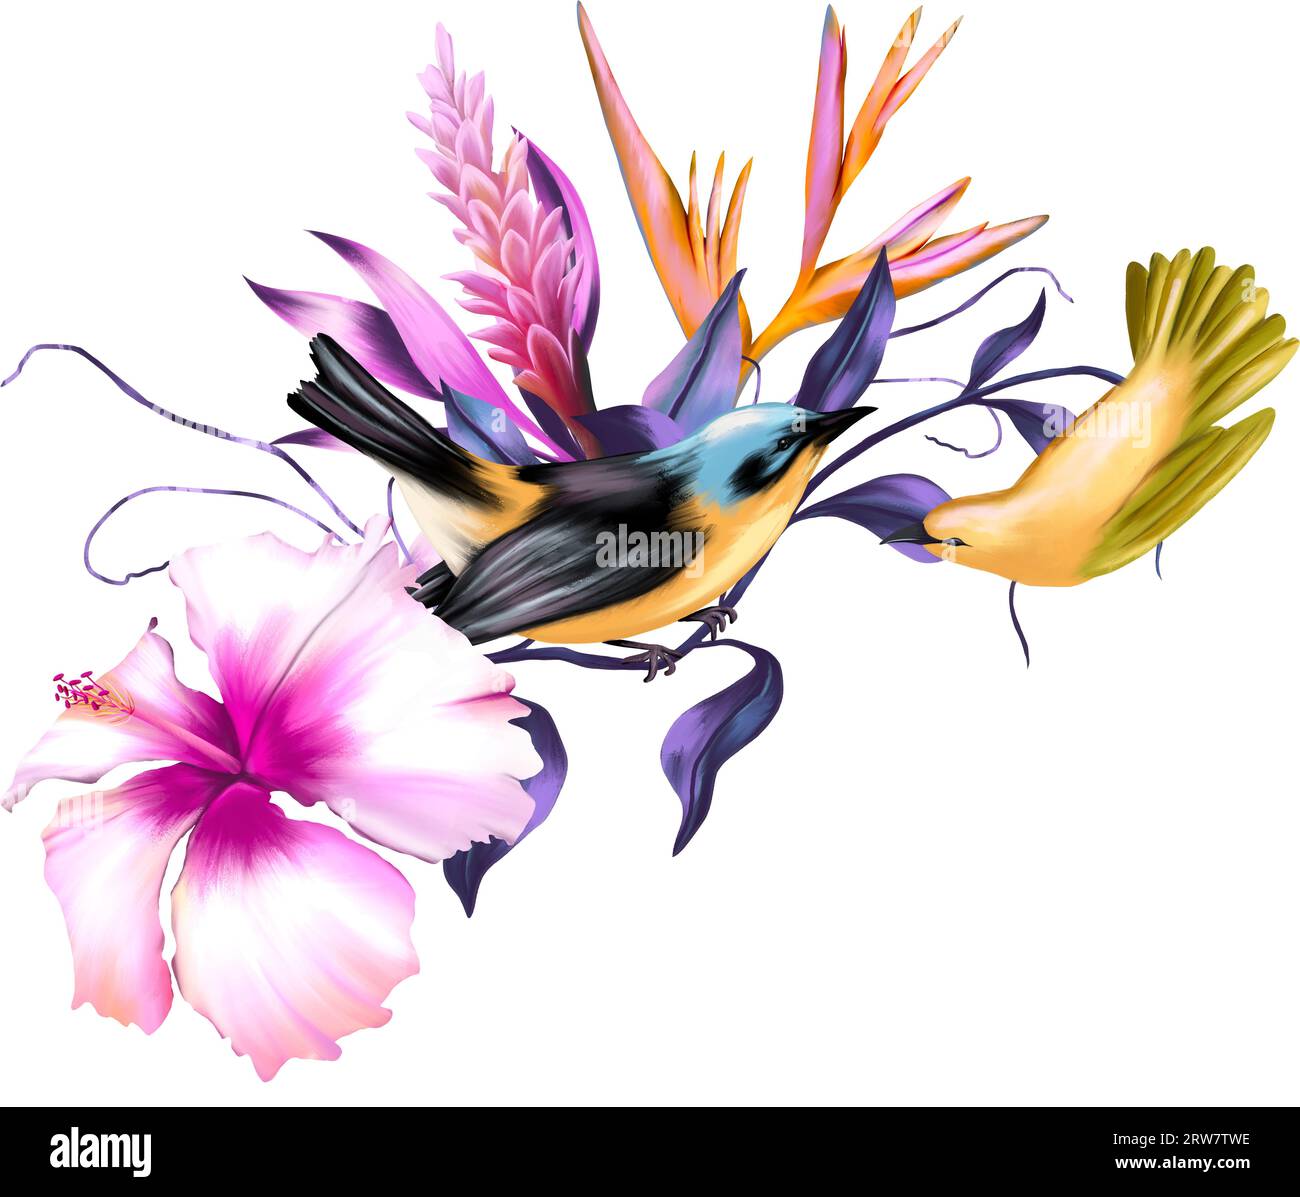 Tropical flower composition with two colourful birds Stock Photo